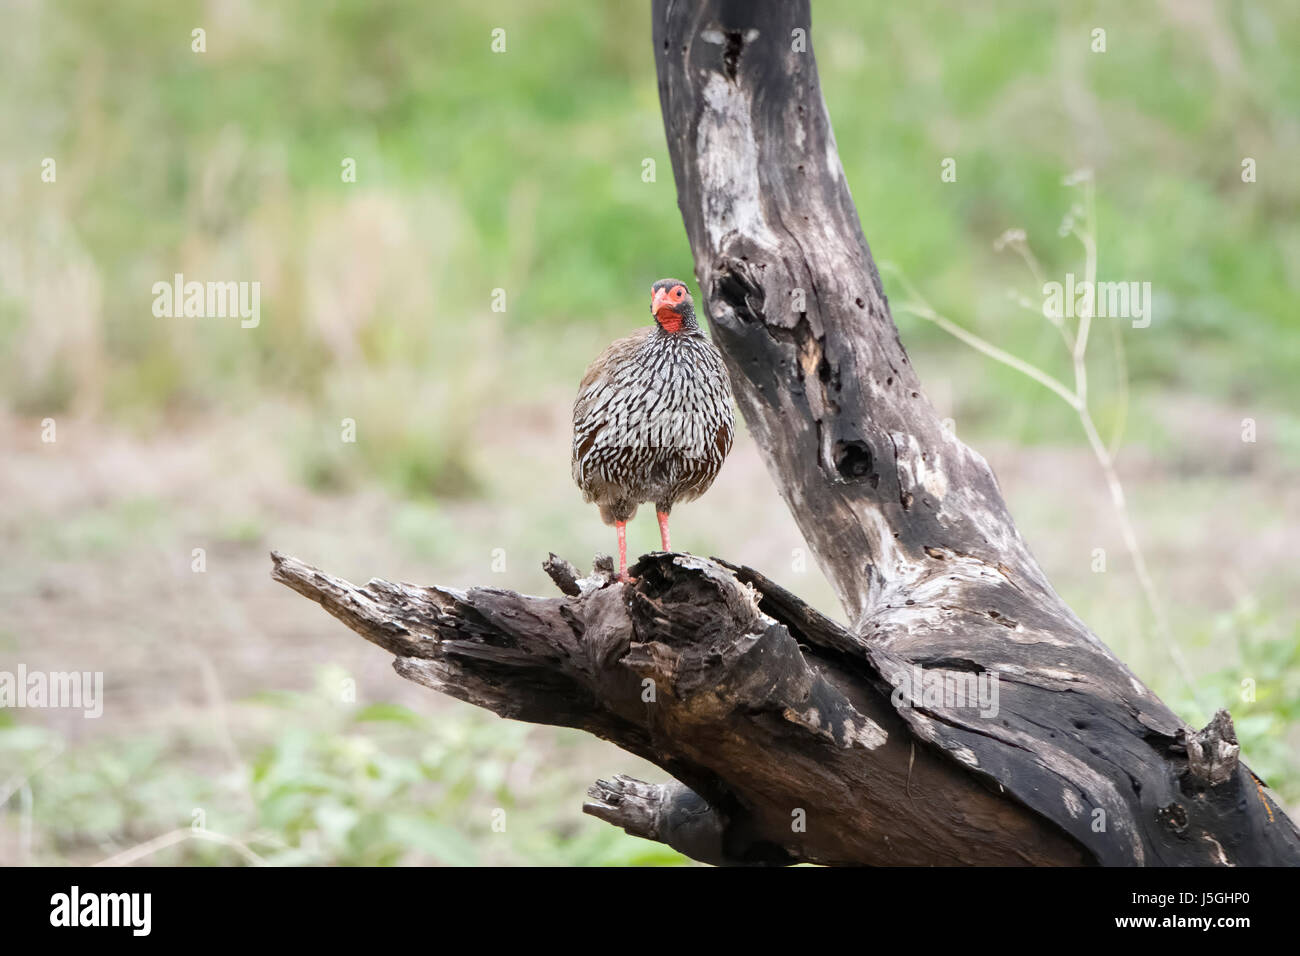 Red-necked Francolin (Francolinus afer) on Tree Stump in Northern Tanzania Stock Photo